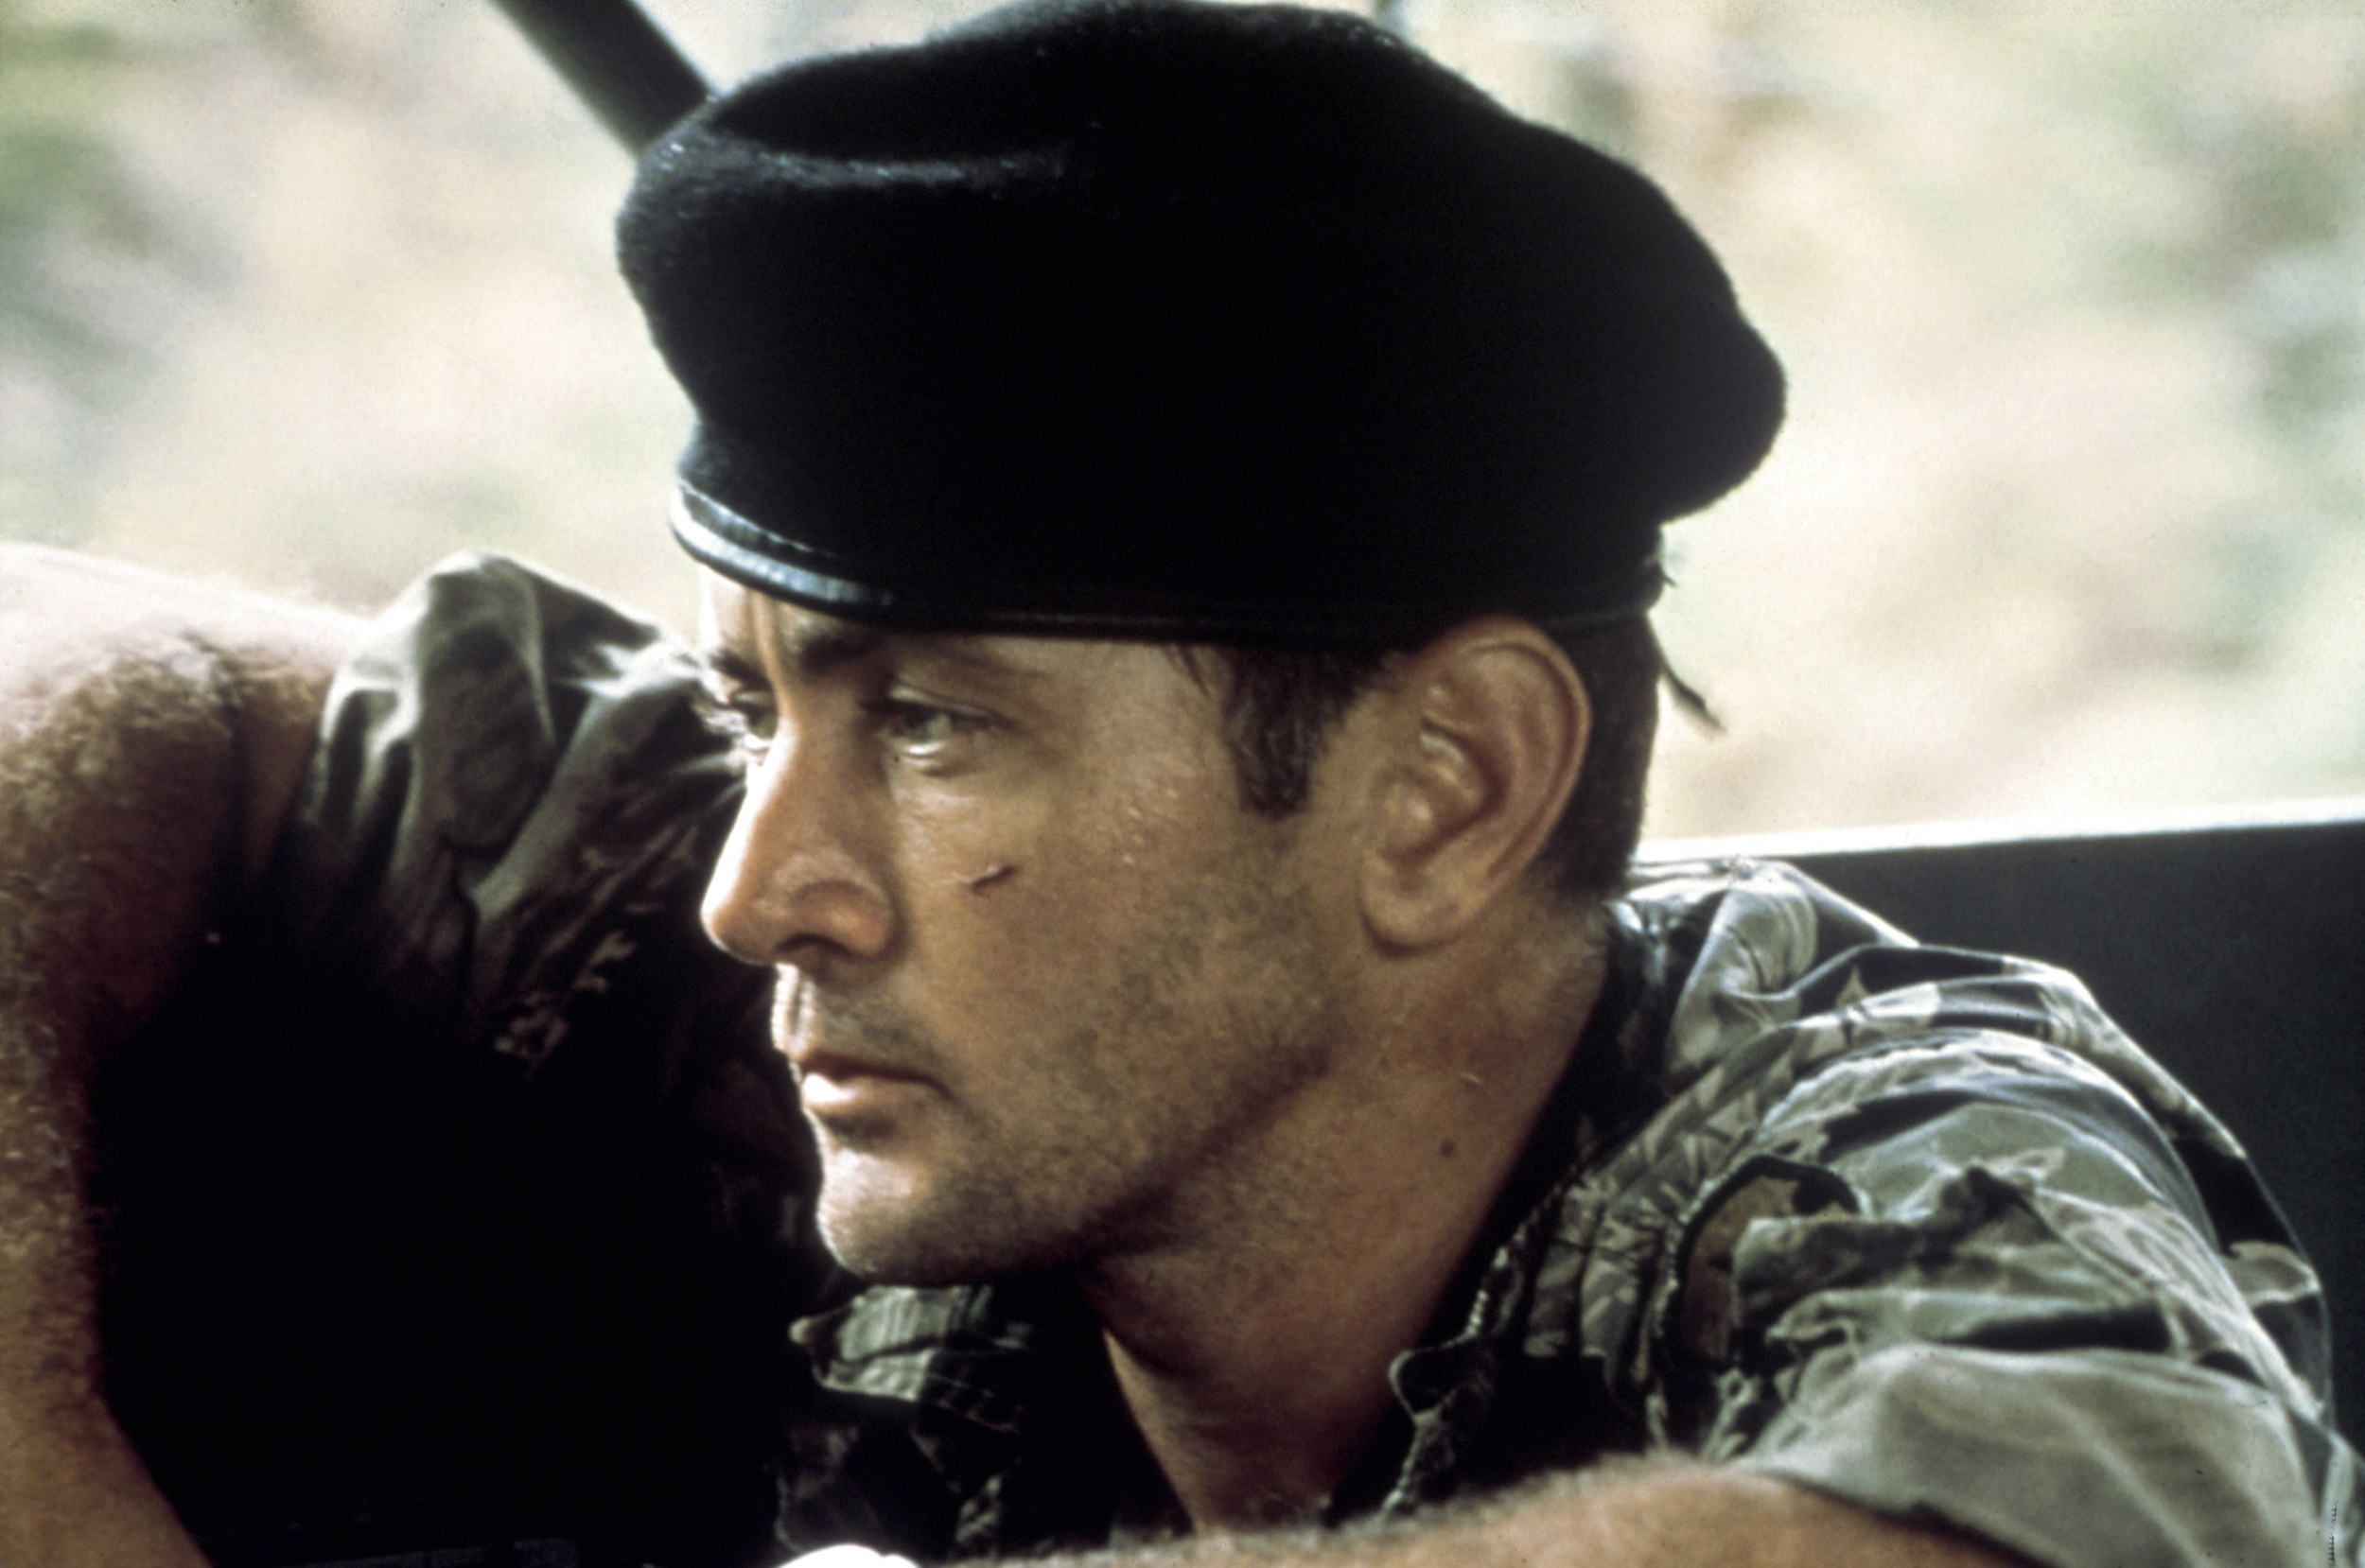 <p>Francis Ford Coppola’s war epic is full of memorable moments and iconic lines, which is probably a relief to him, given that the film almost killed him. That includes the opening of the film, when a distraught Captain Willard laments, “Saigon. Shıt. I’m still only in Saigon.”</p><p>You may also like: <a href='https://www.yardbarker.com/entertainment/articles/the_25_greatest_movie_shootouts_101923/s1__38412202'>The 25 greatest movie shootouts</a></p>